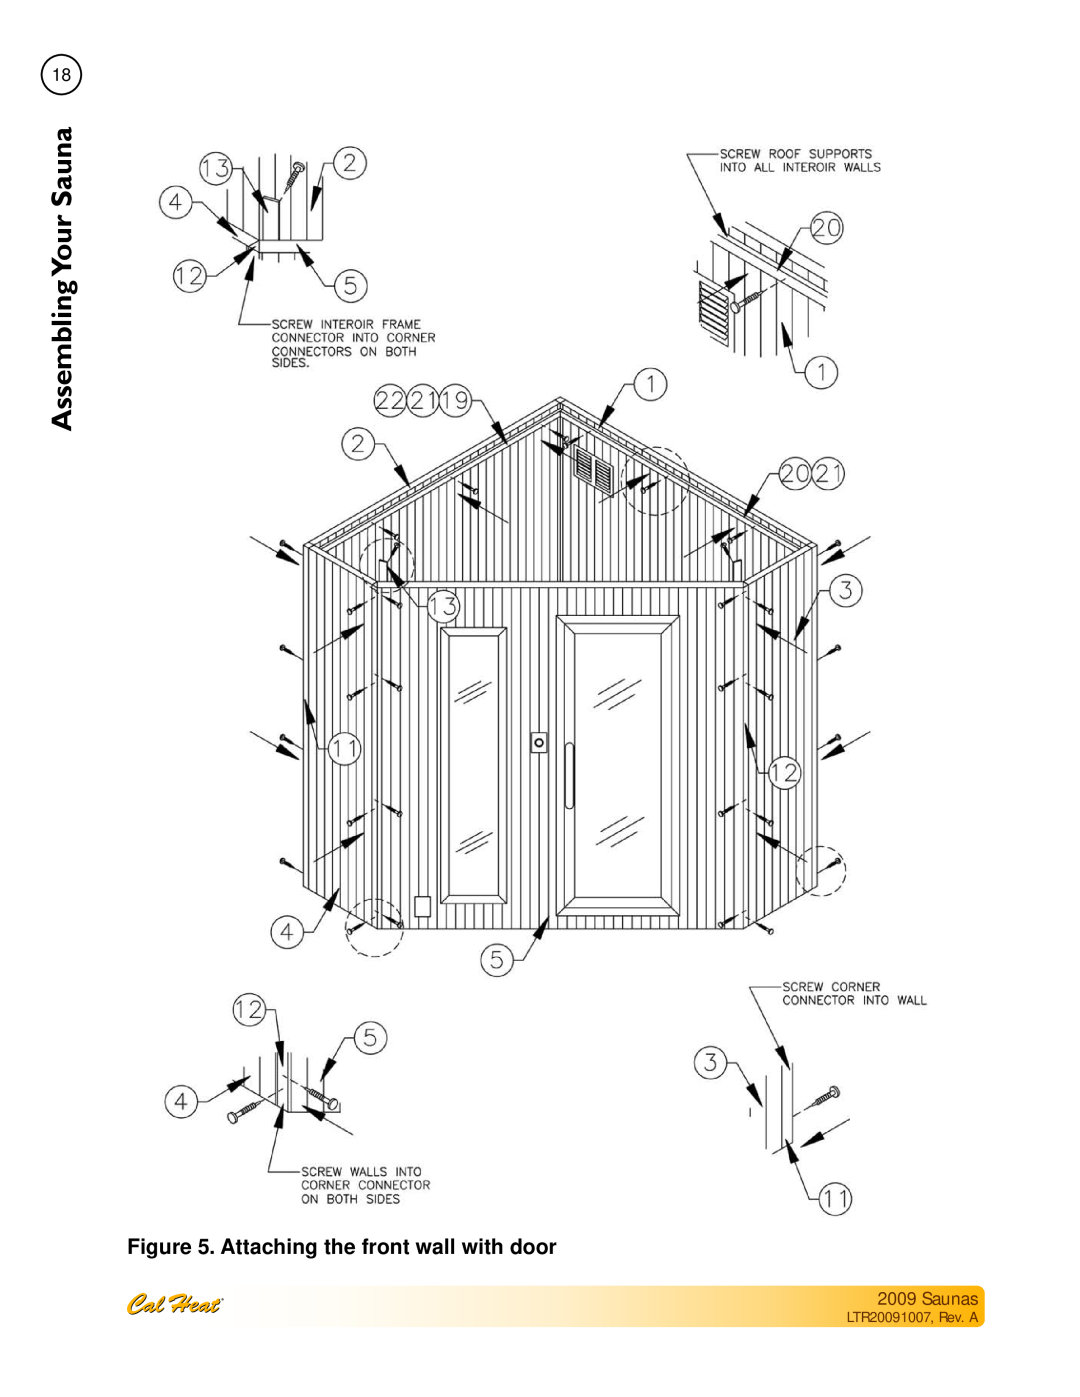 Cal Spas Saunas manual Attaching the front wall with door, SaunaYour Assembling, LTR20091007, Rev. A 